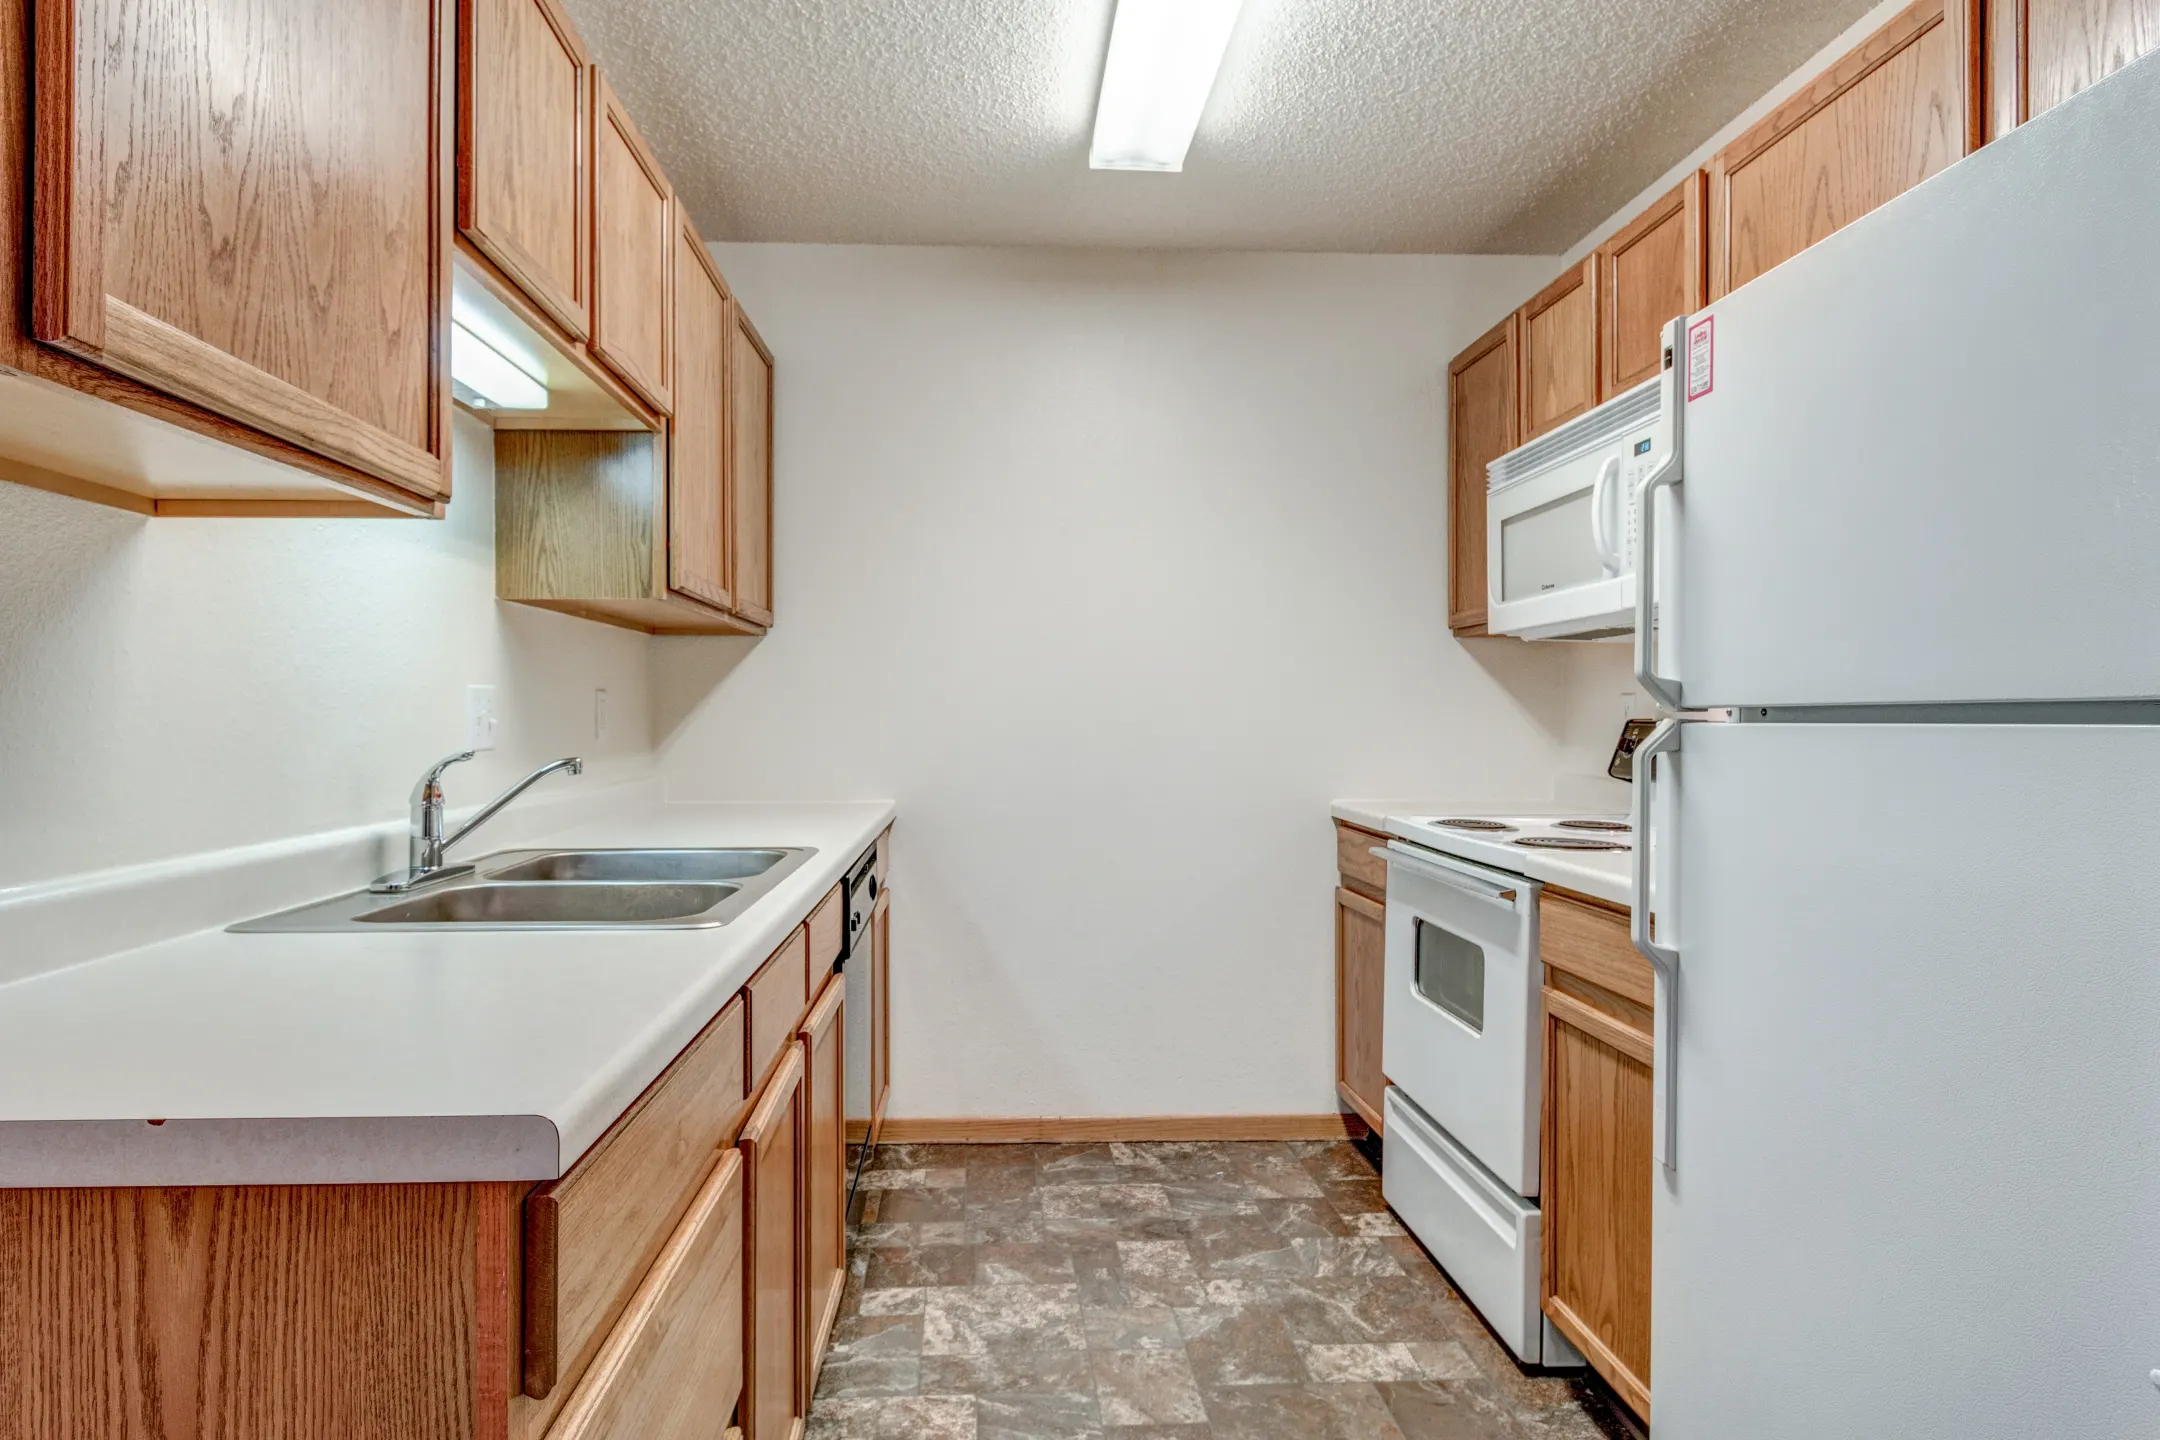 Kitchen - Wheatland Place Apartments & Townhomes - Fargo, ND